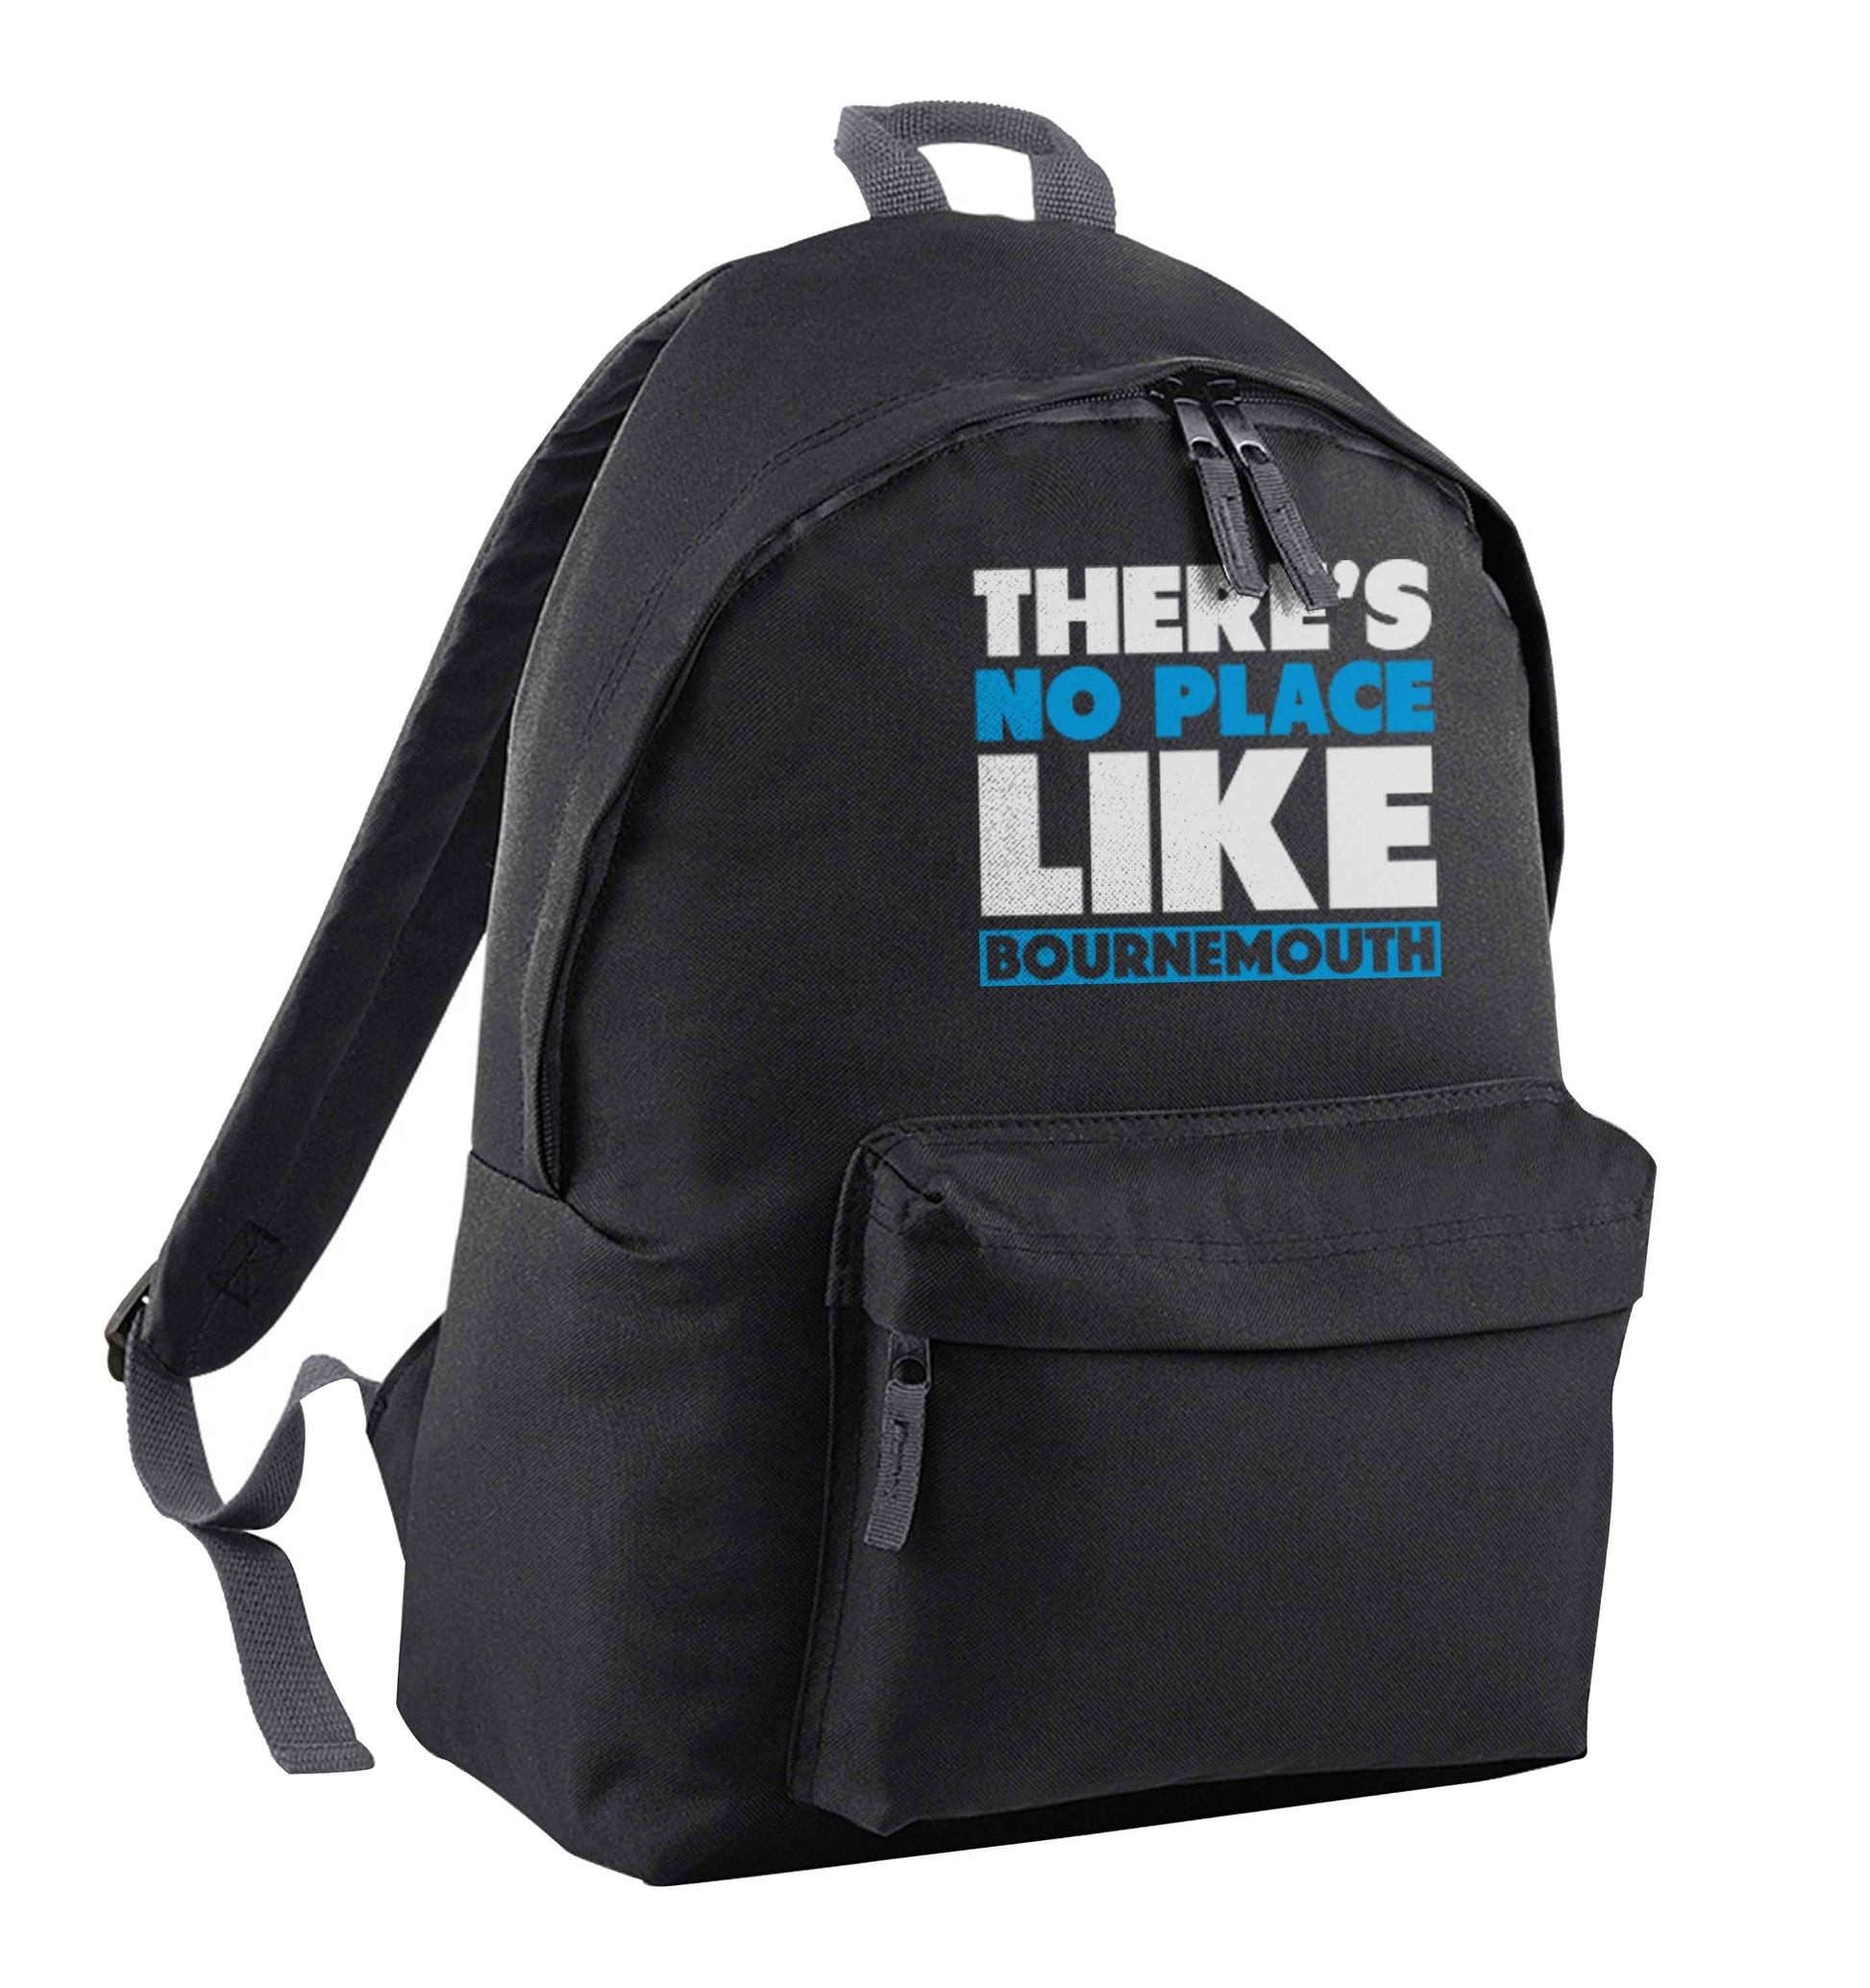 There's no place like Bournemouth black adults backpack